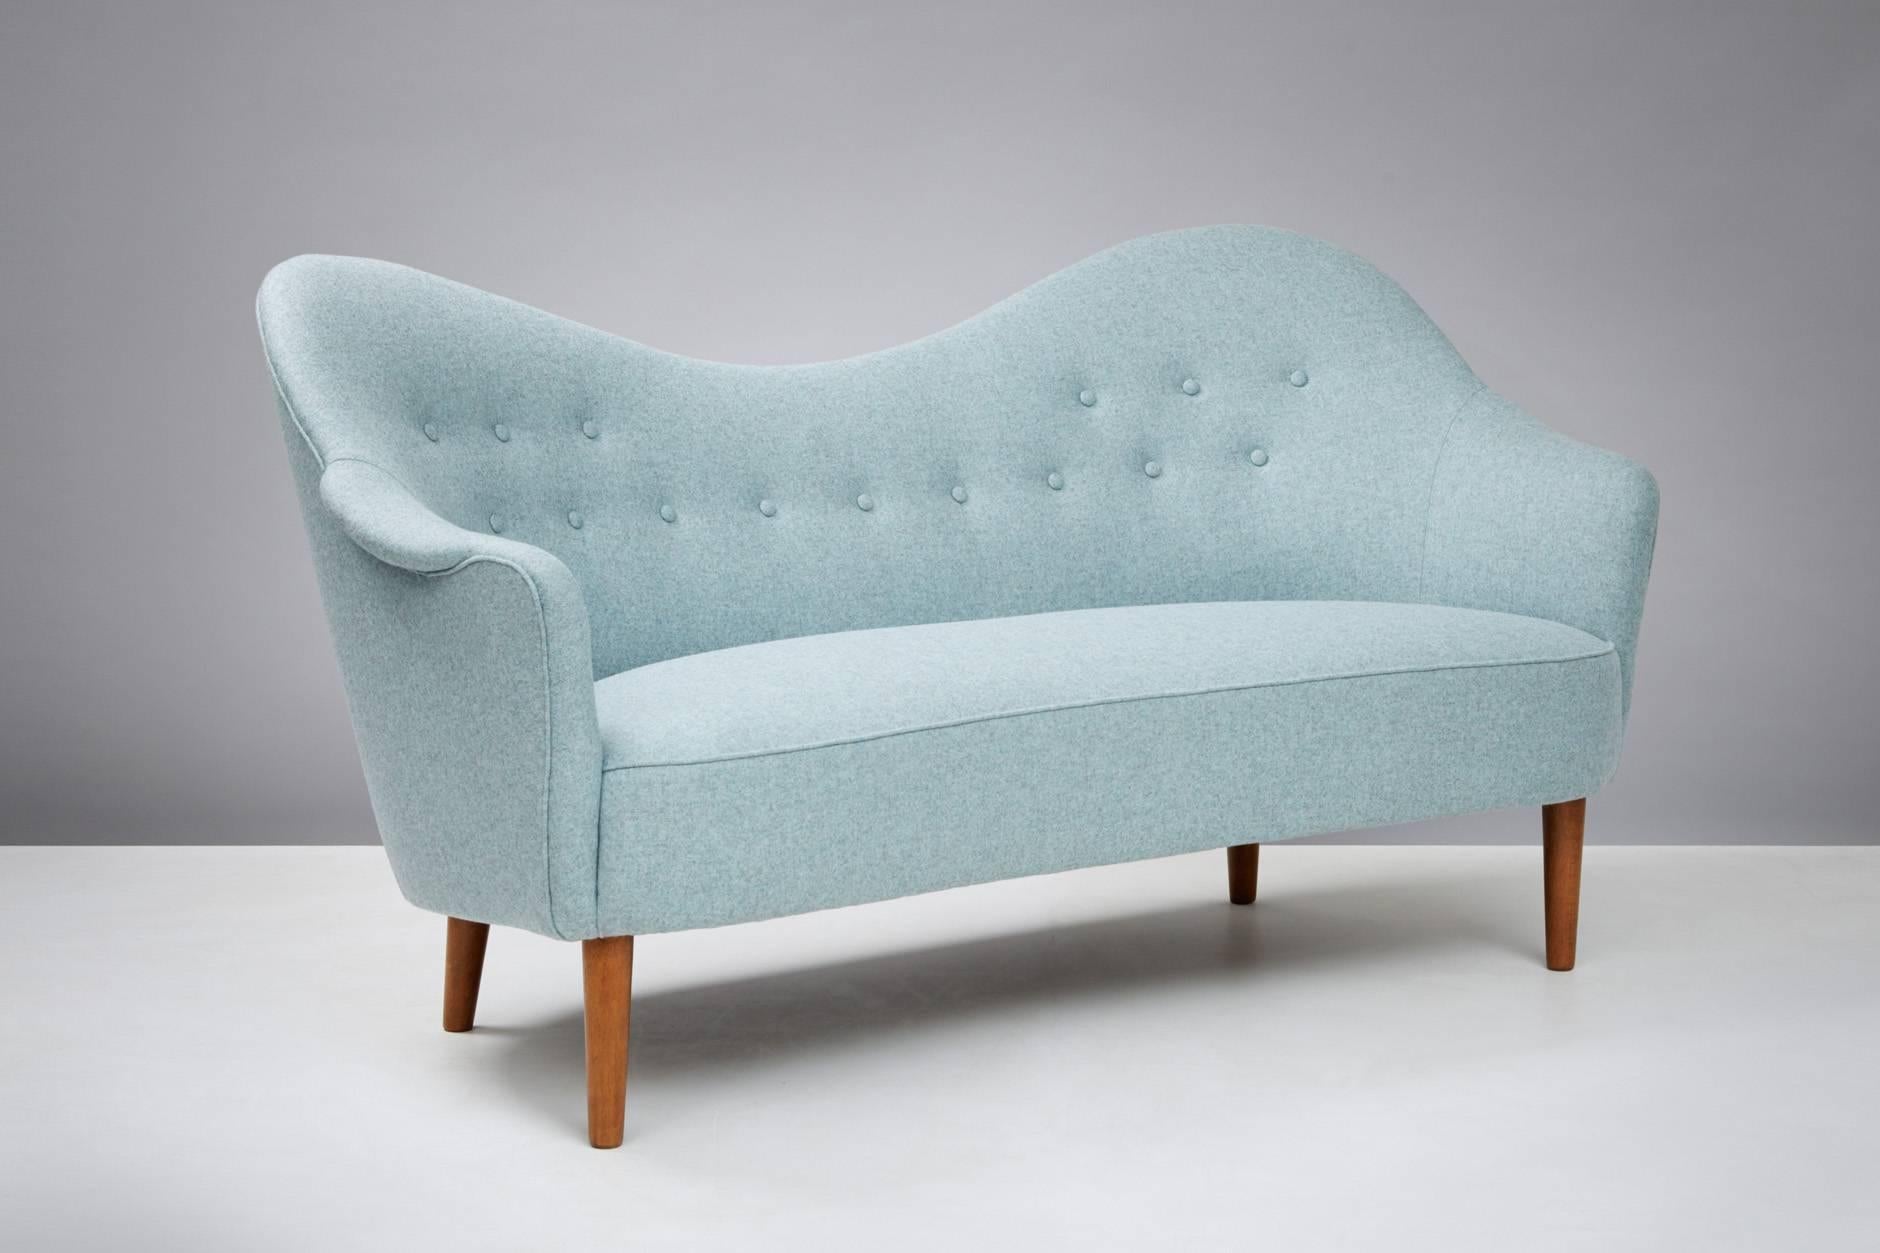 First designed in 1956 and produced by AB Record, Bollnas, Sweden. Reupholstered in Melton wool fabric from Abraham Moon. Stained beech legs.